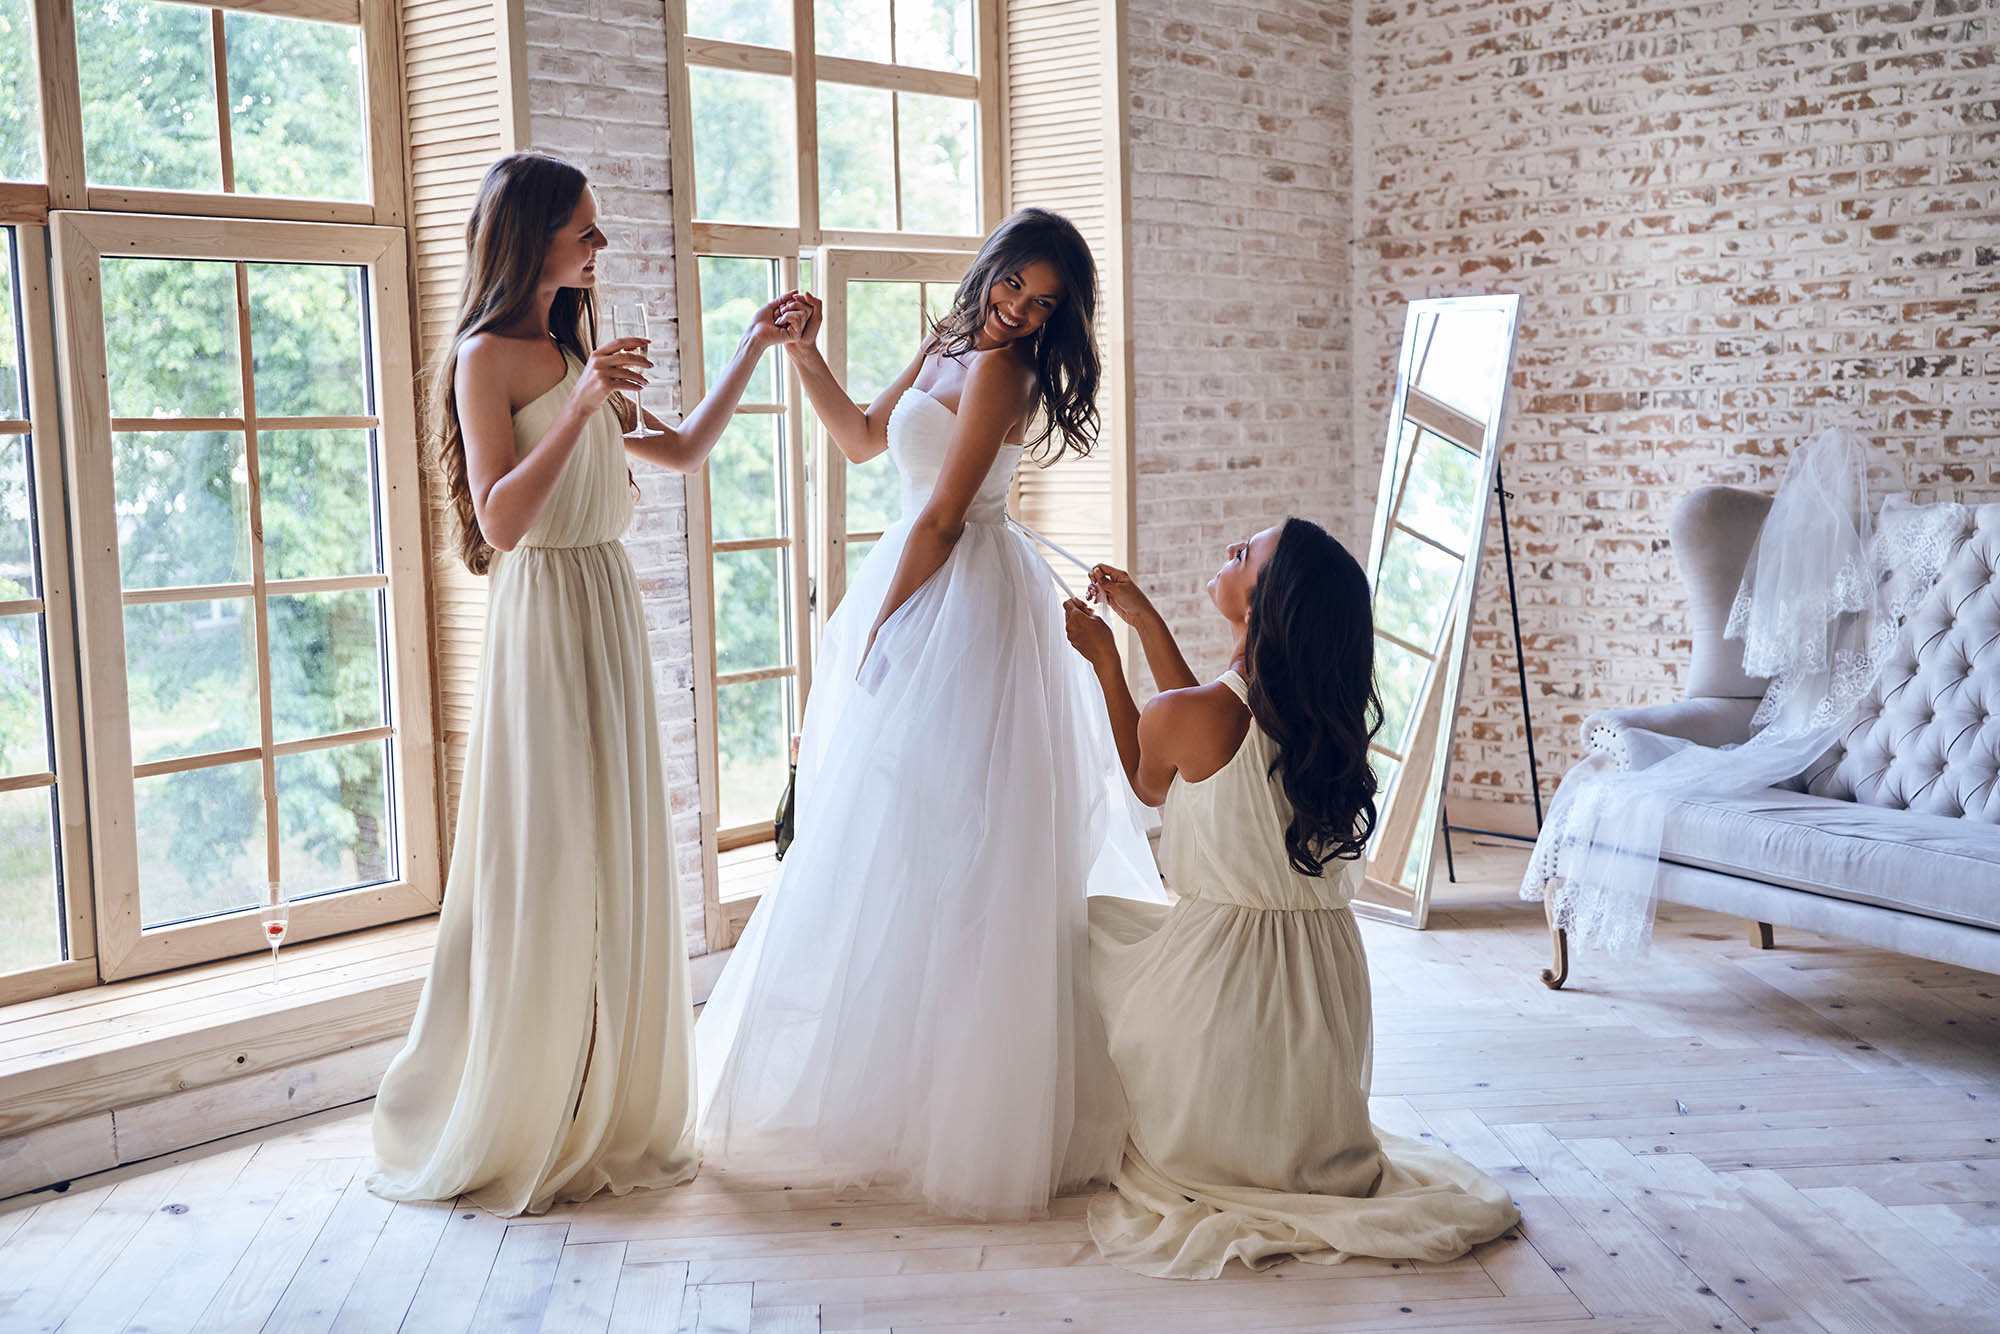  Full length of two attractive young women adjusting a wedding dress on a